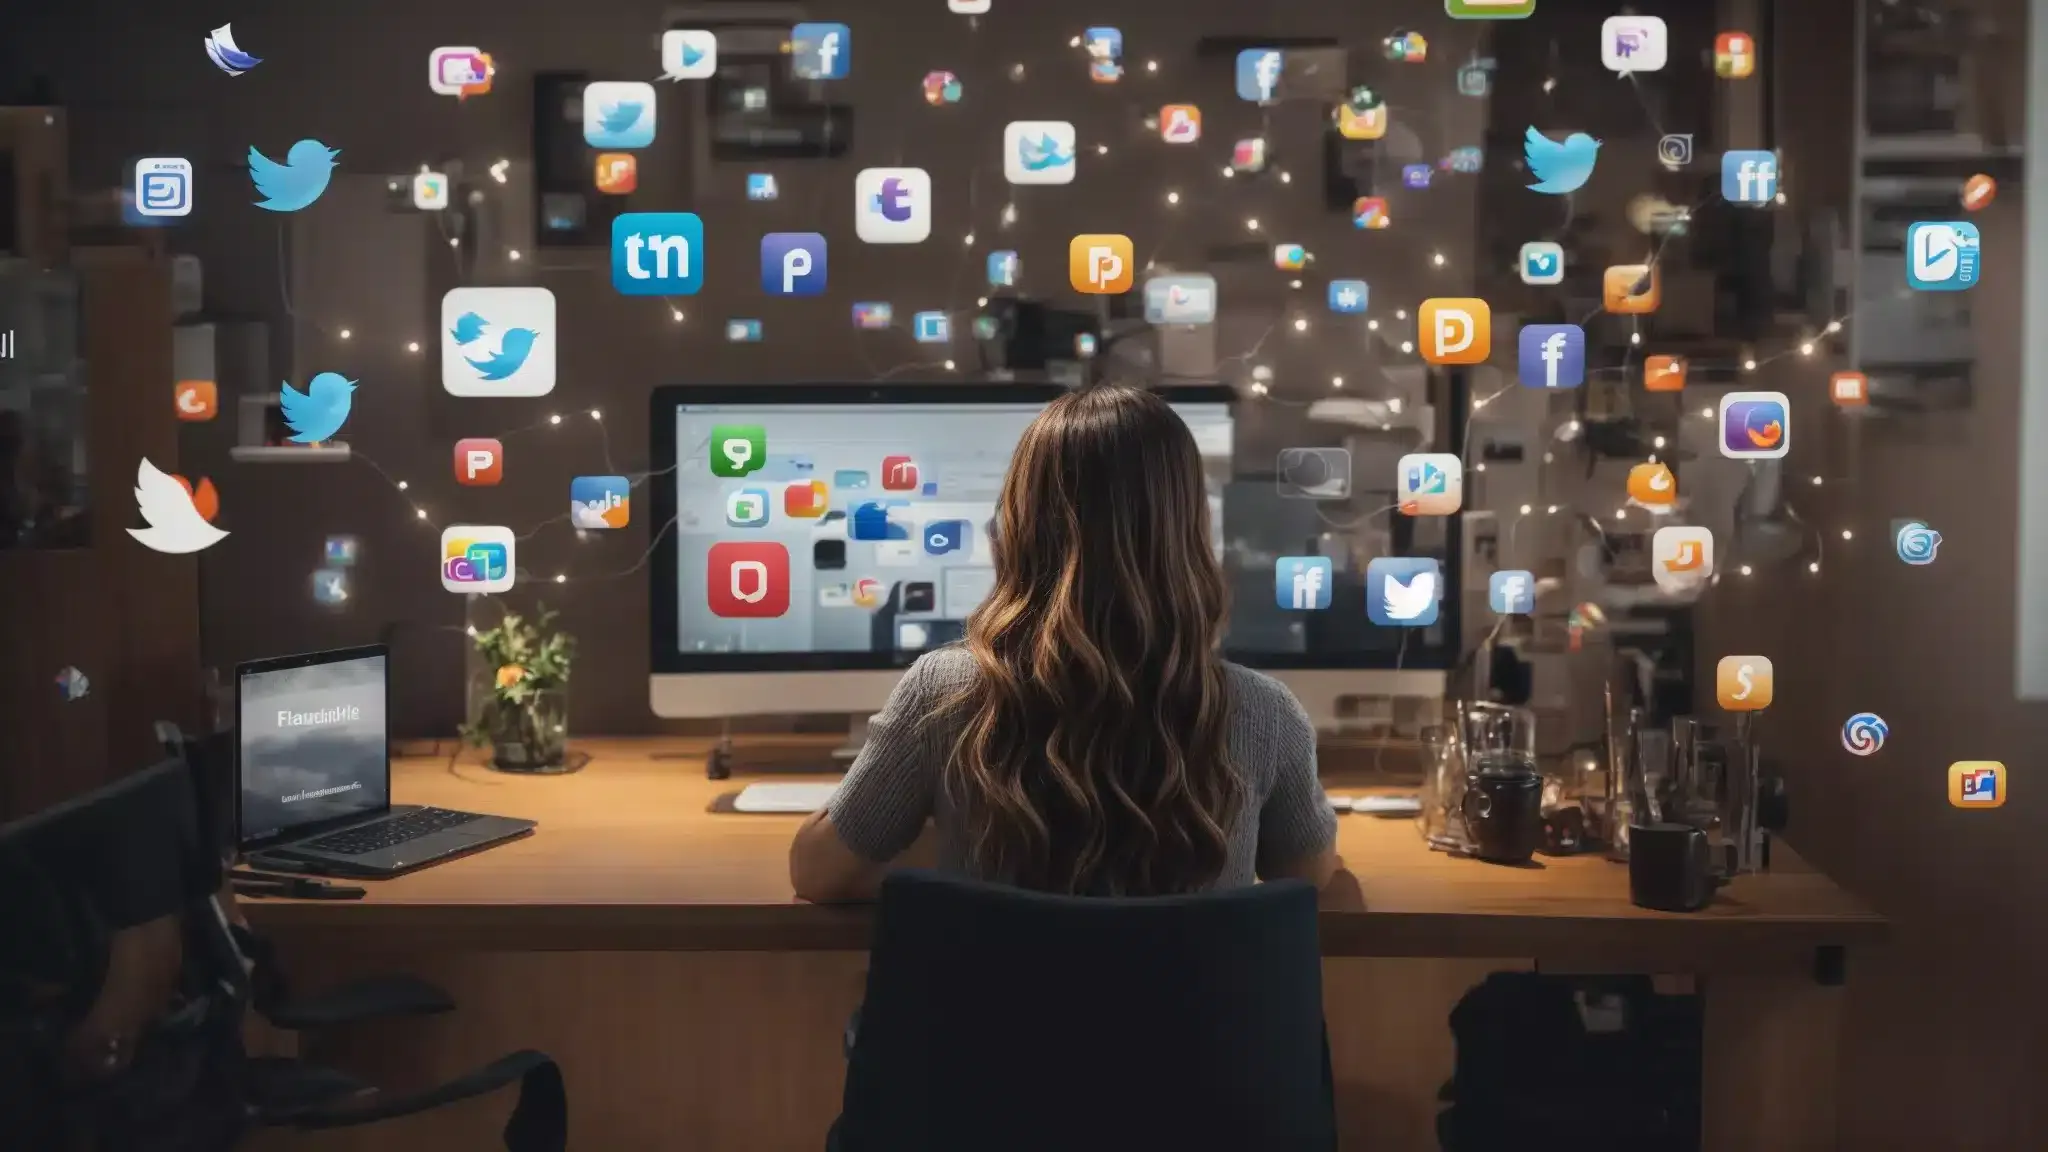 a marketing professional happily interacts with animated social media icons representing different platforms floating around her workspace.